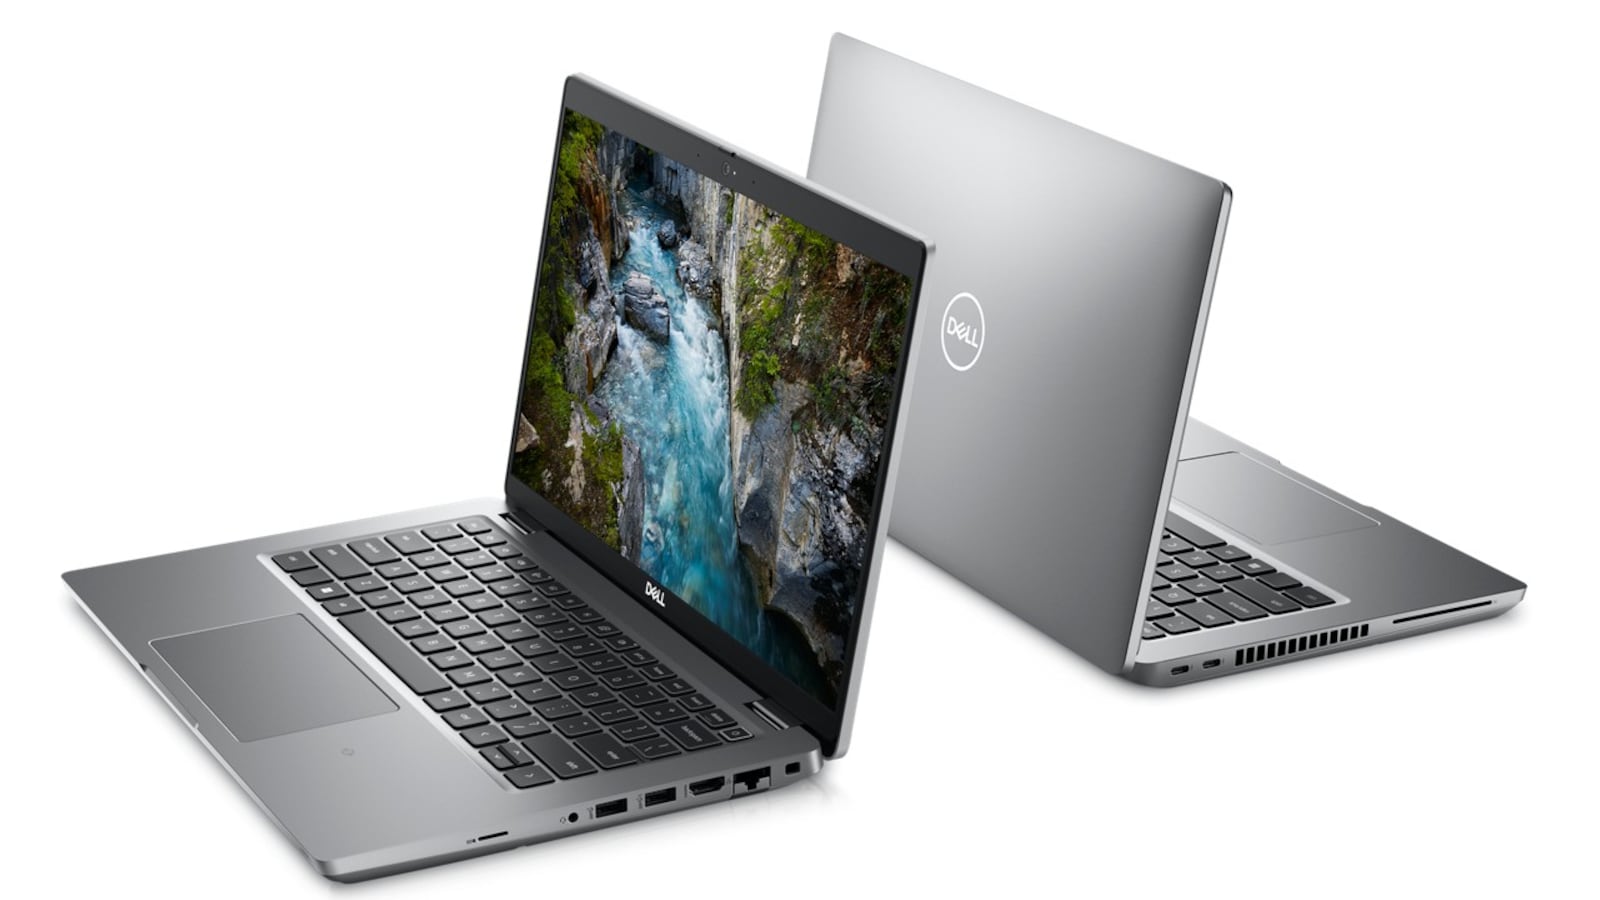 Dell Latitude and Precision commercial laptops with 12th Gen Intel CPUs  launched in India